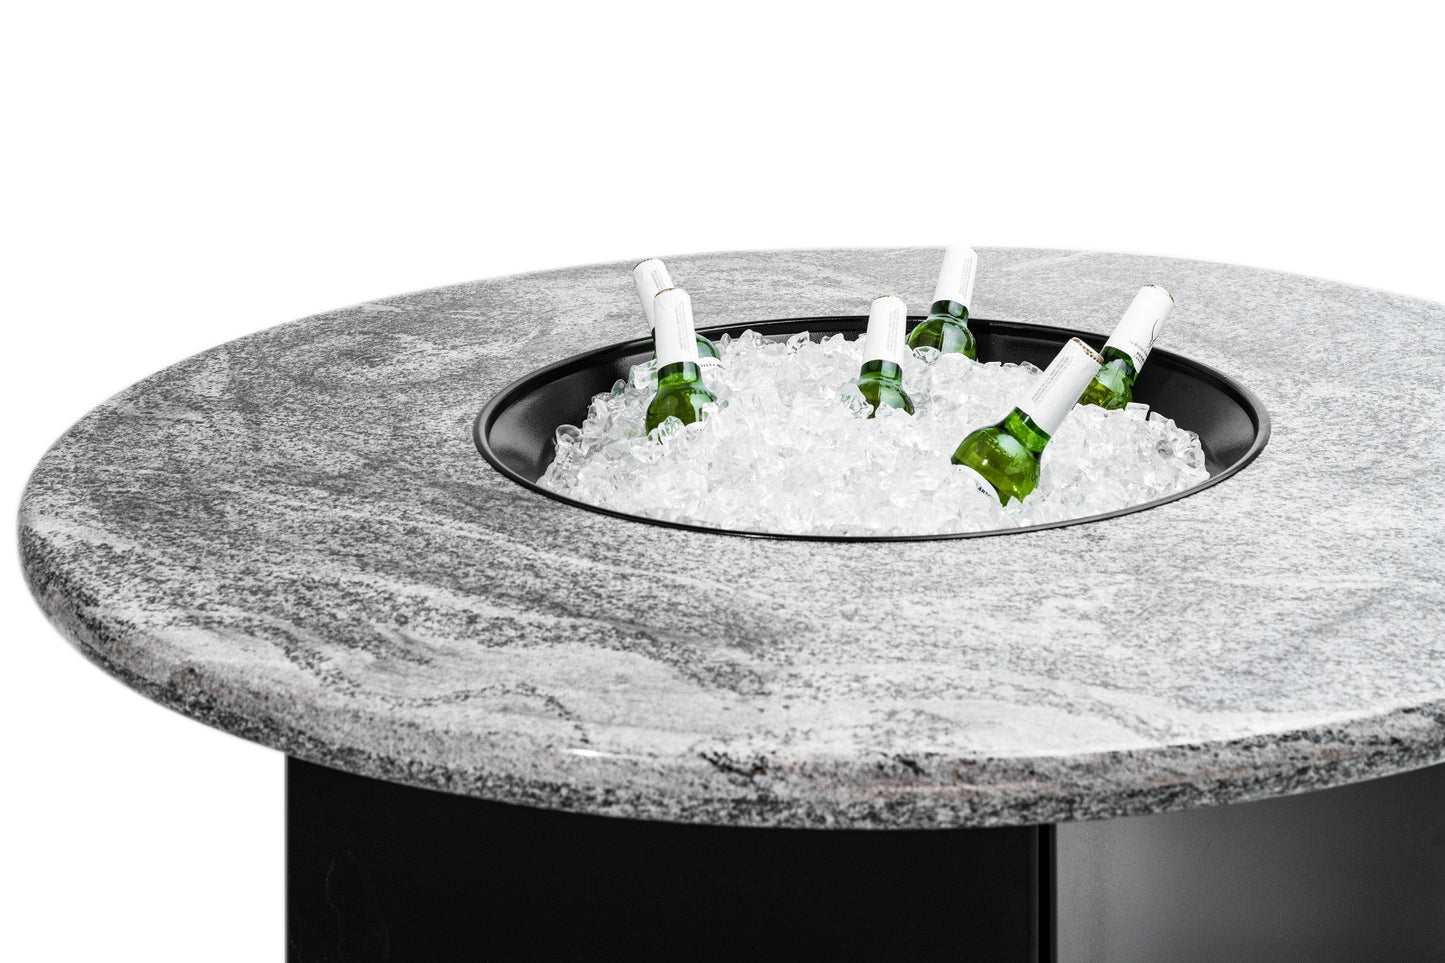 Silver Tiger Oriflamme Fire Table with optional ice bucket insert